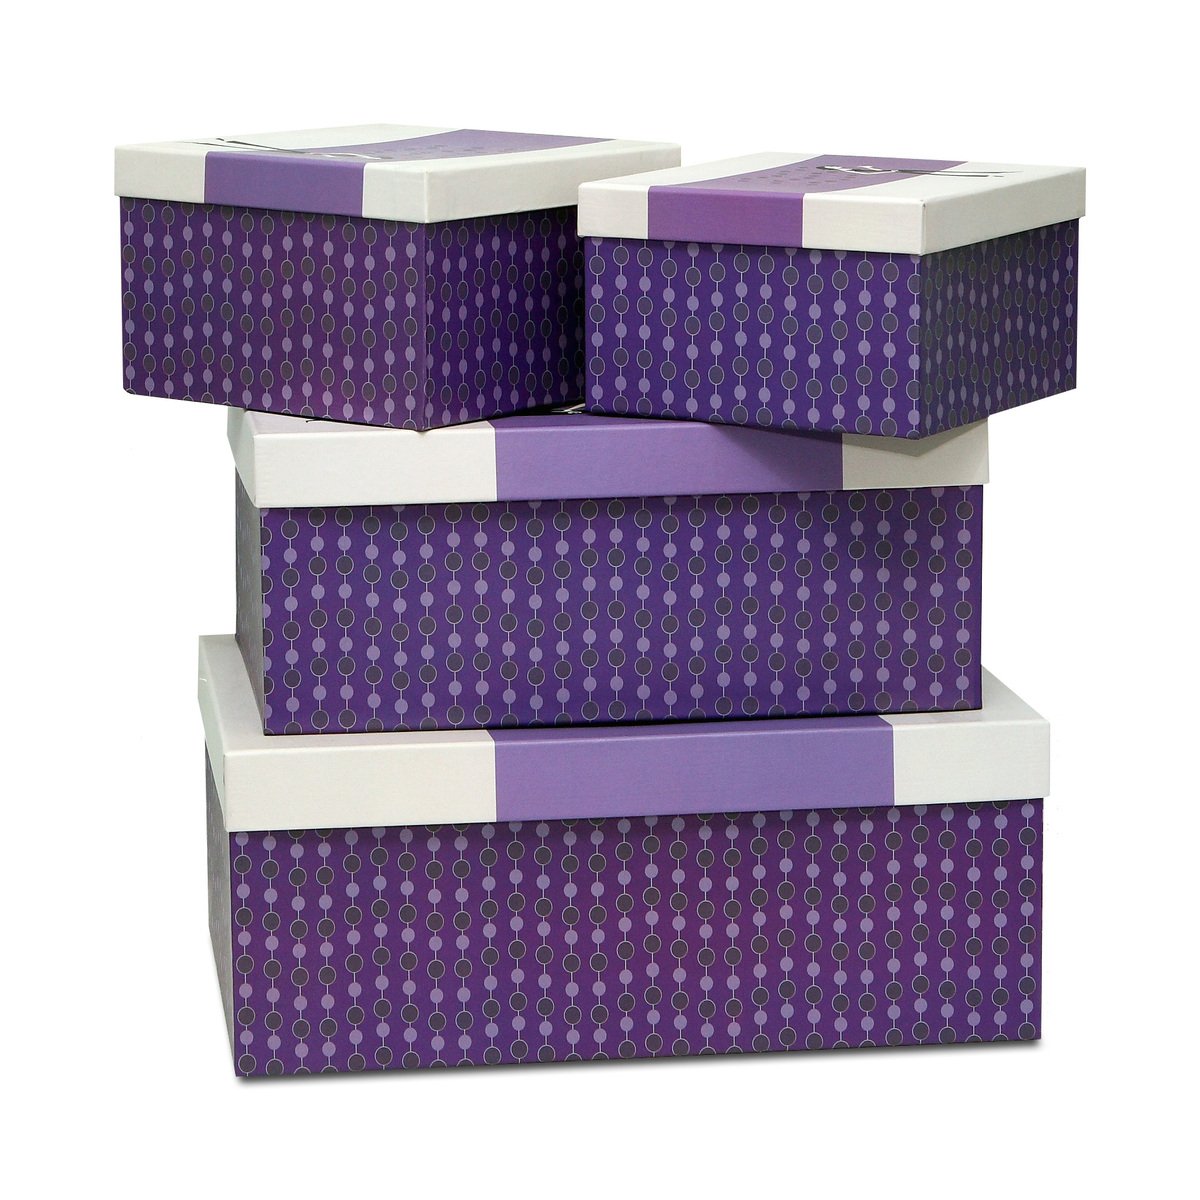 three purple boxes are stacked up next to each other